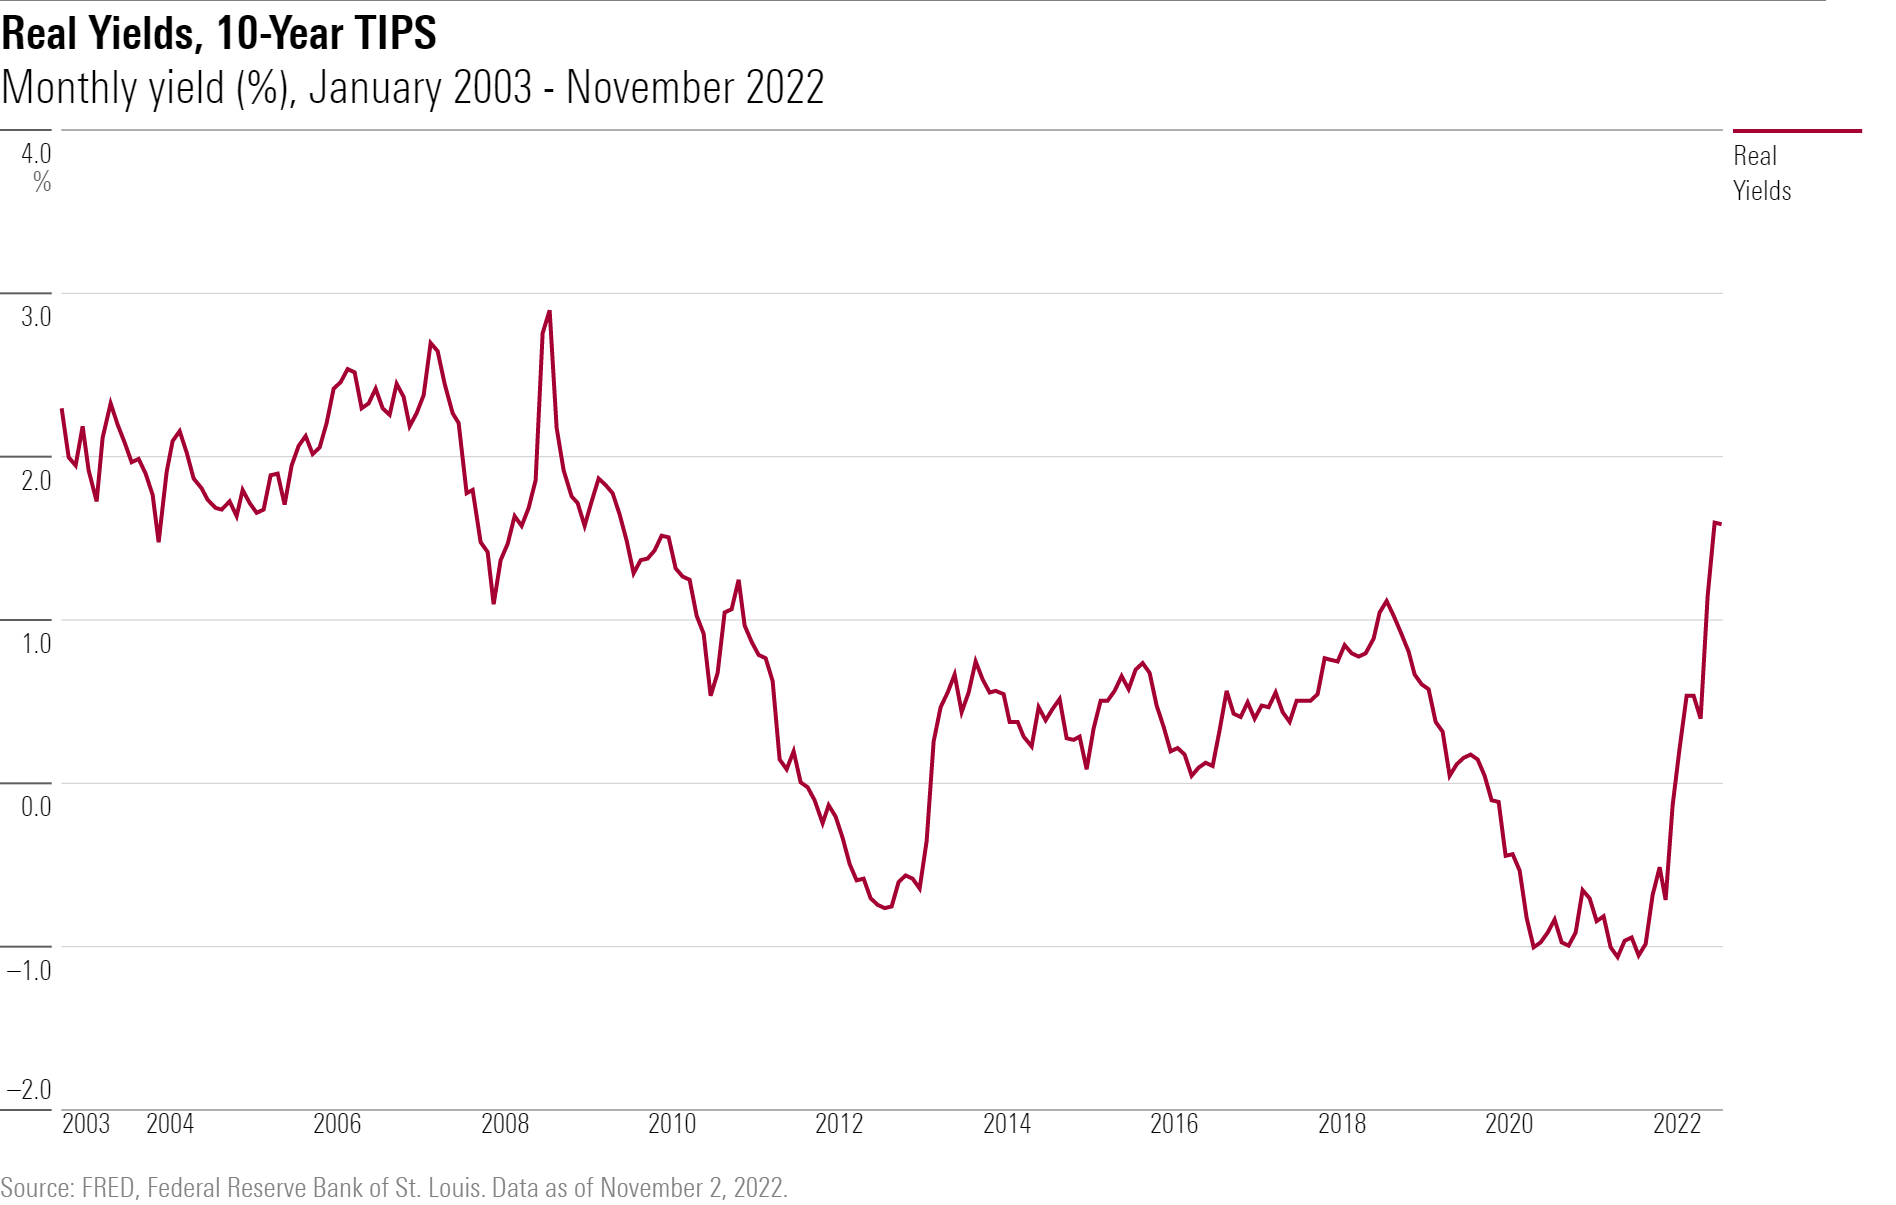 The monthly real returns of the 10-year TIPS, from January 2003 to November 2022.